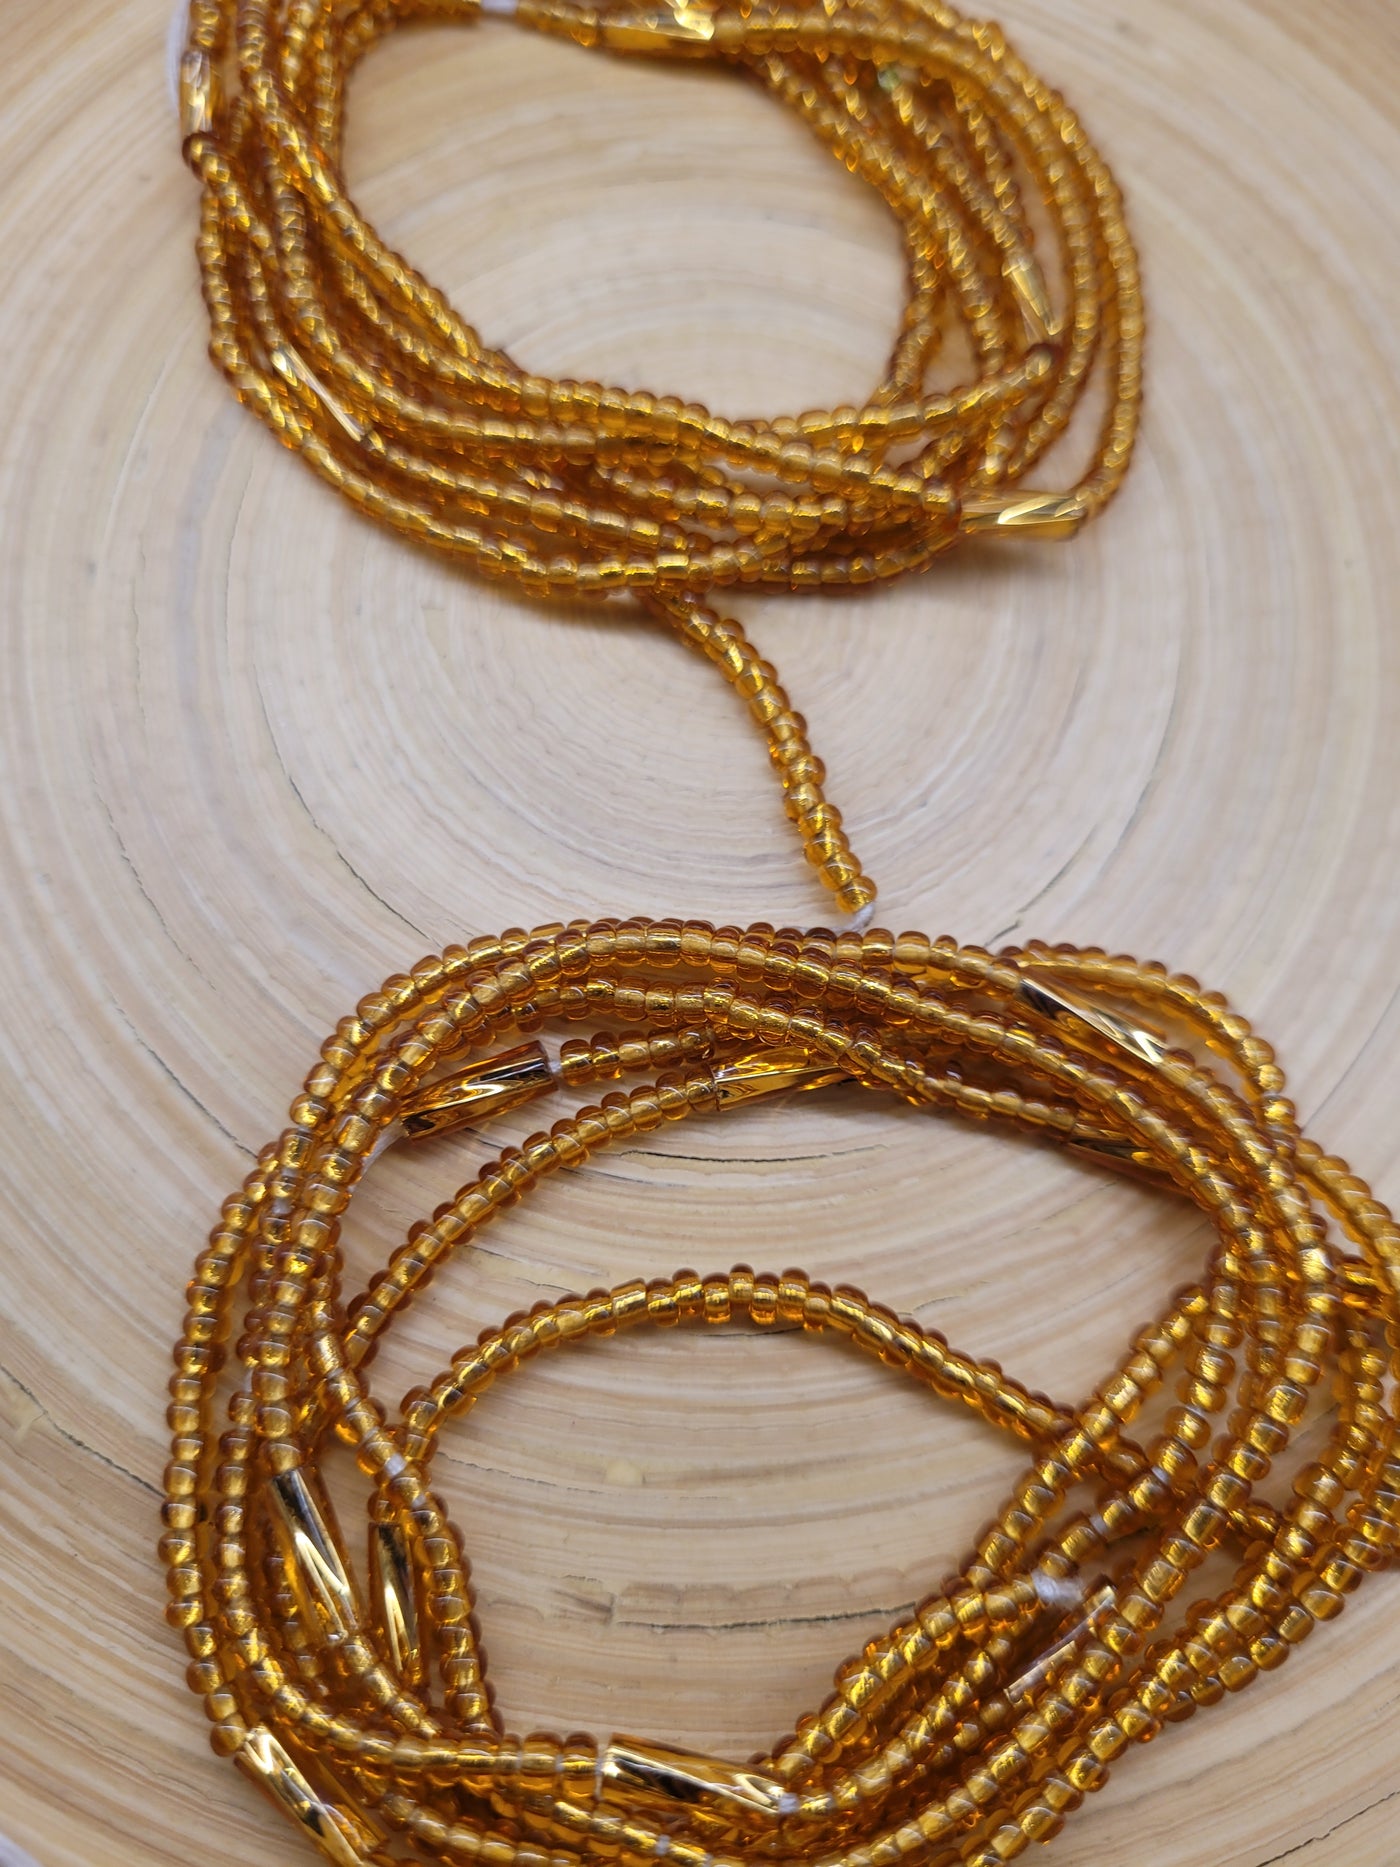 Waist Beads in Gold on Gold